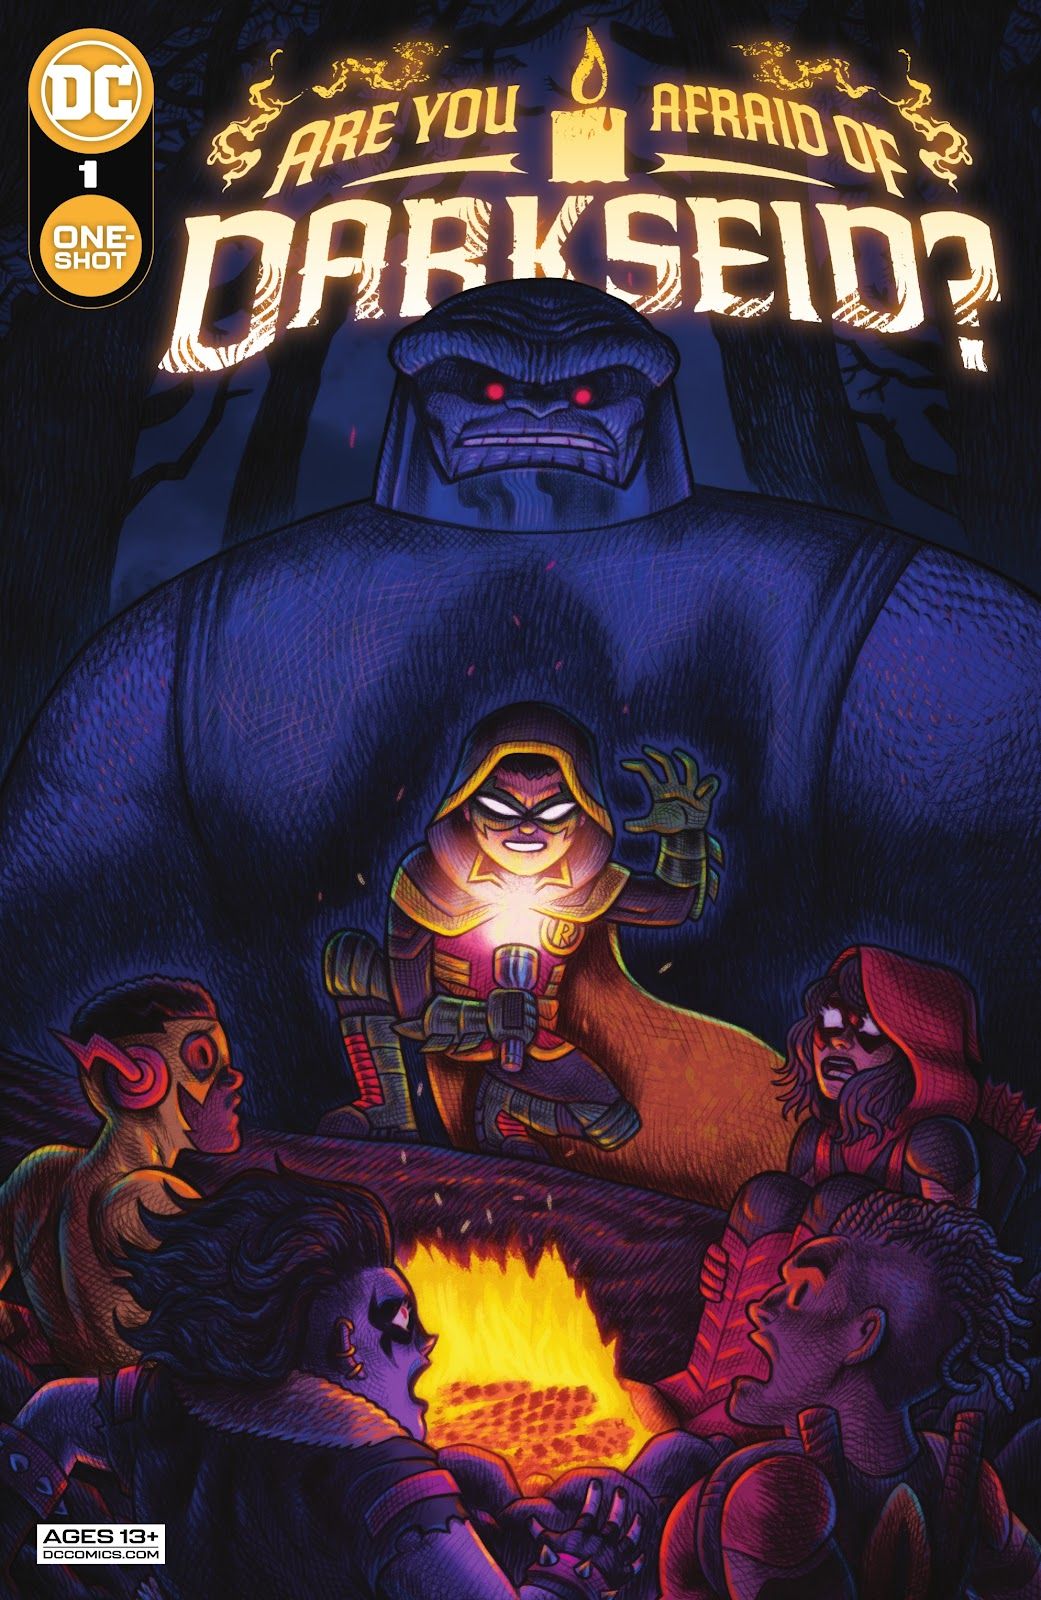 Cover of Are You Afraid of Darkseid #1